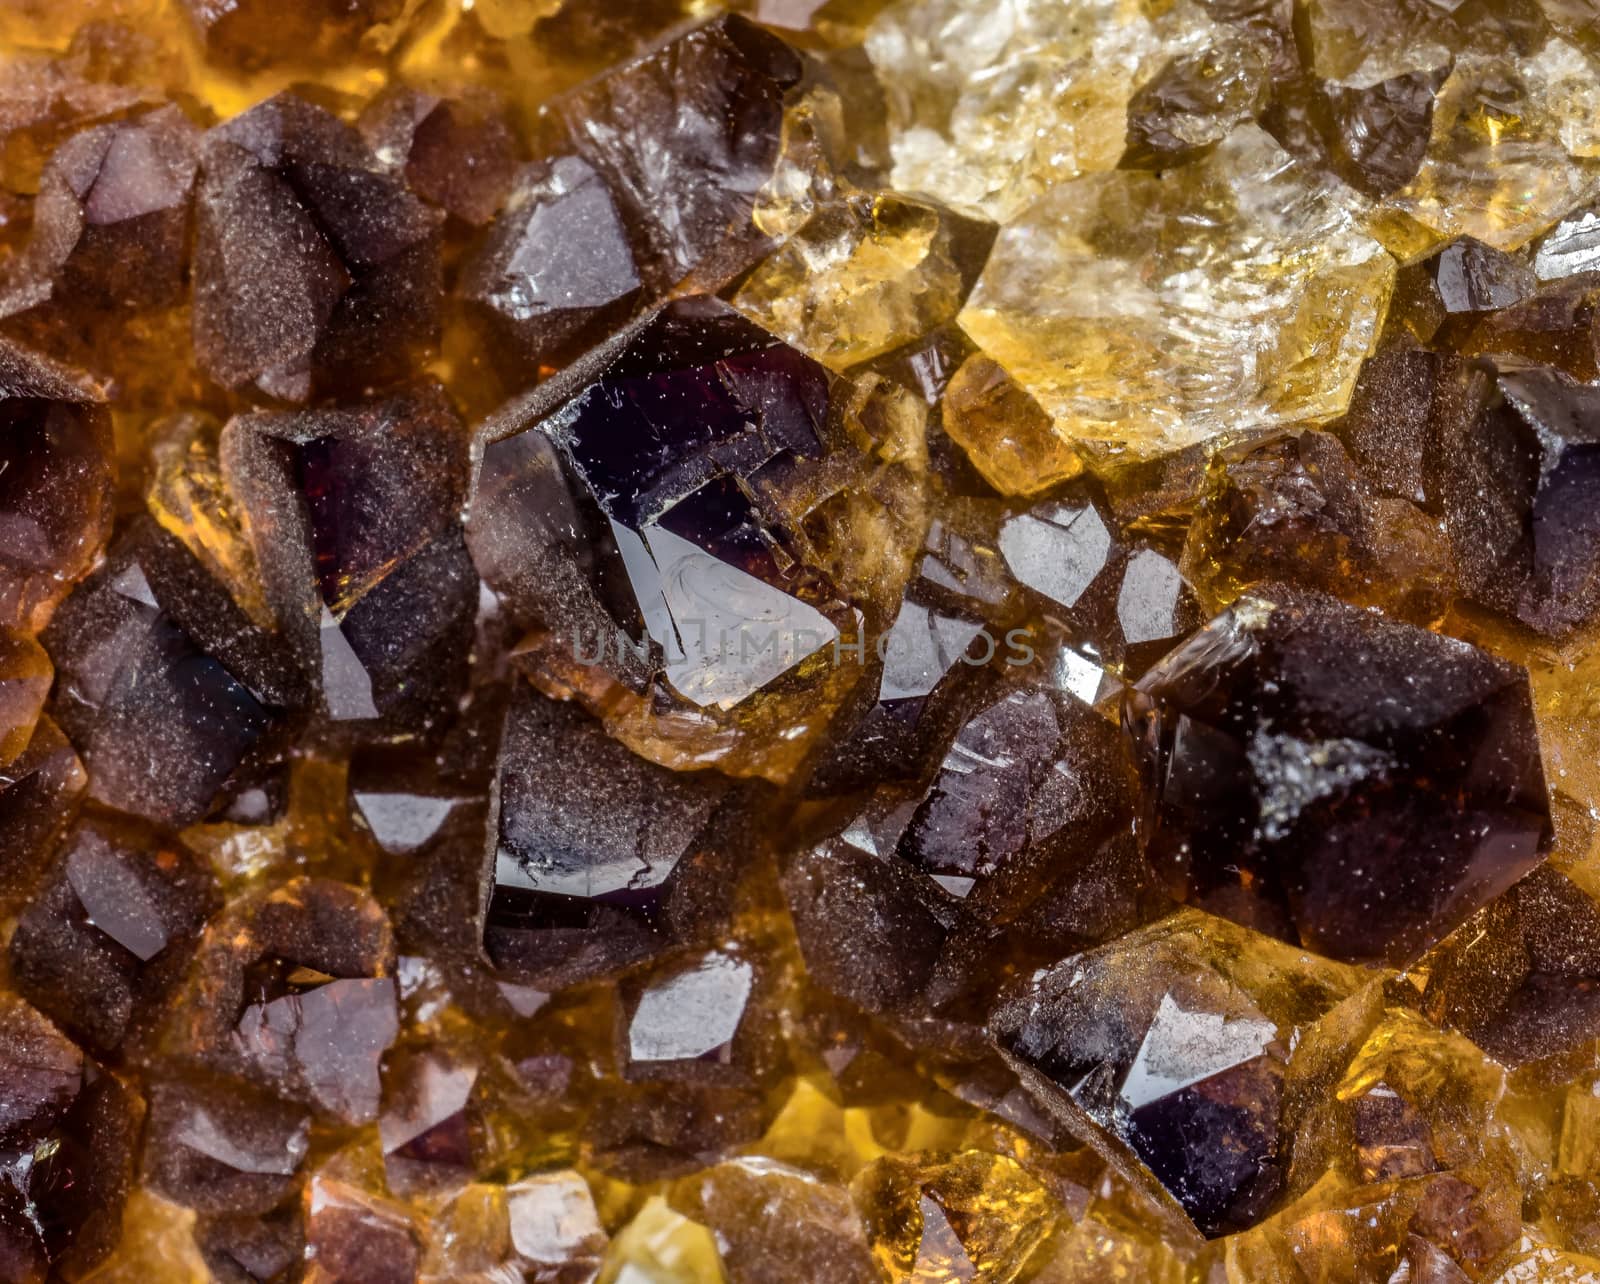 Macrophotography of crystals from quartz (smoke-quartz) by geogif